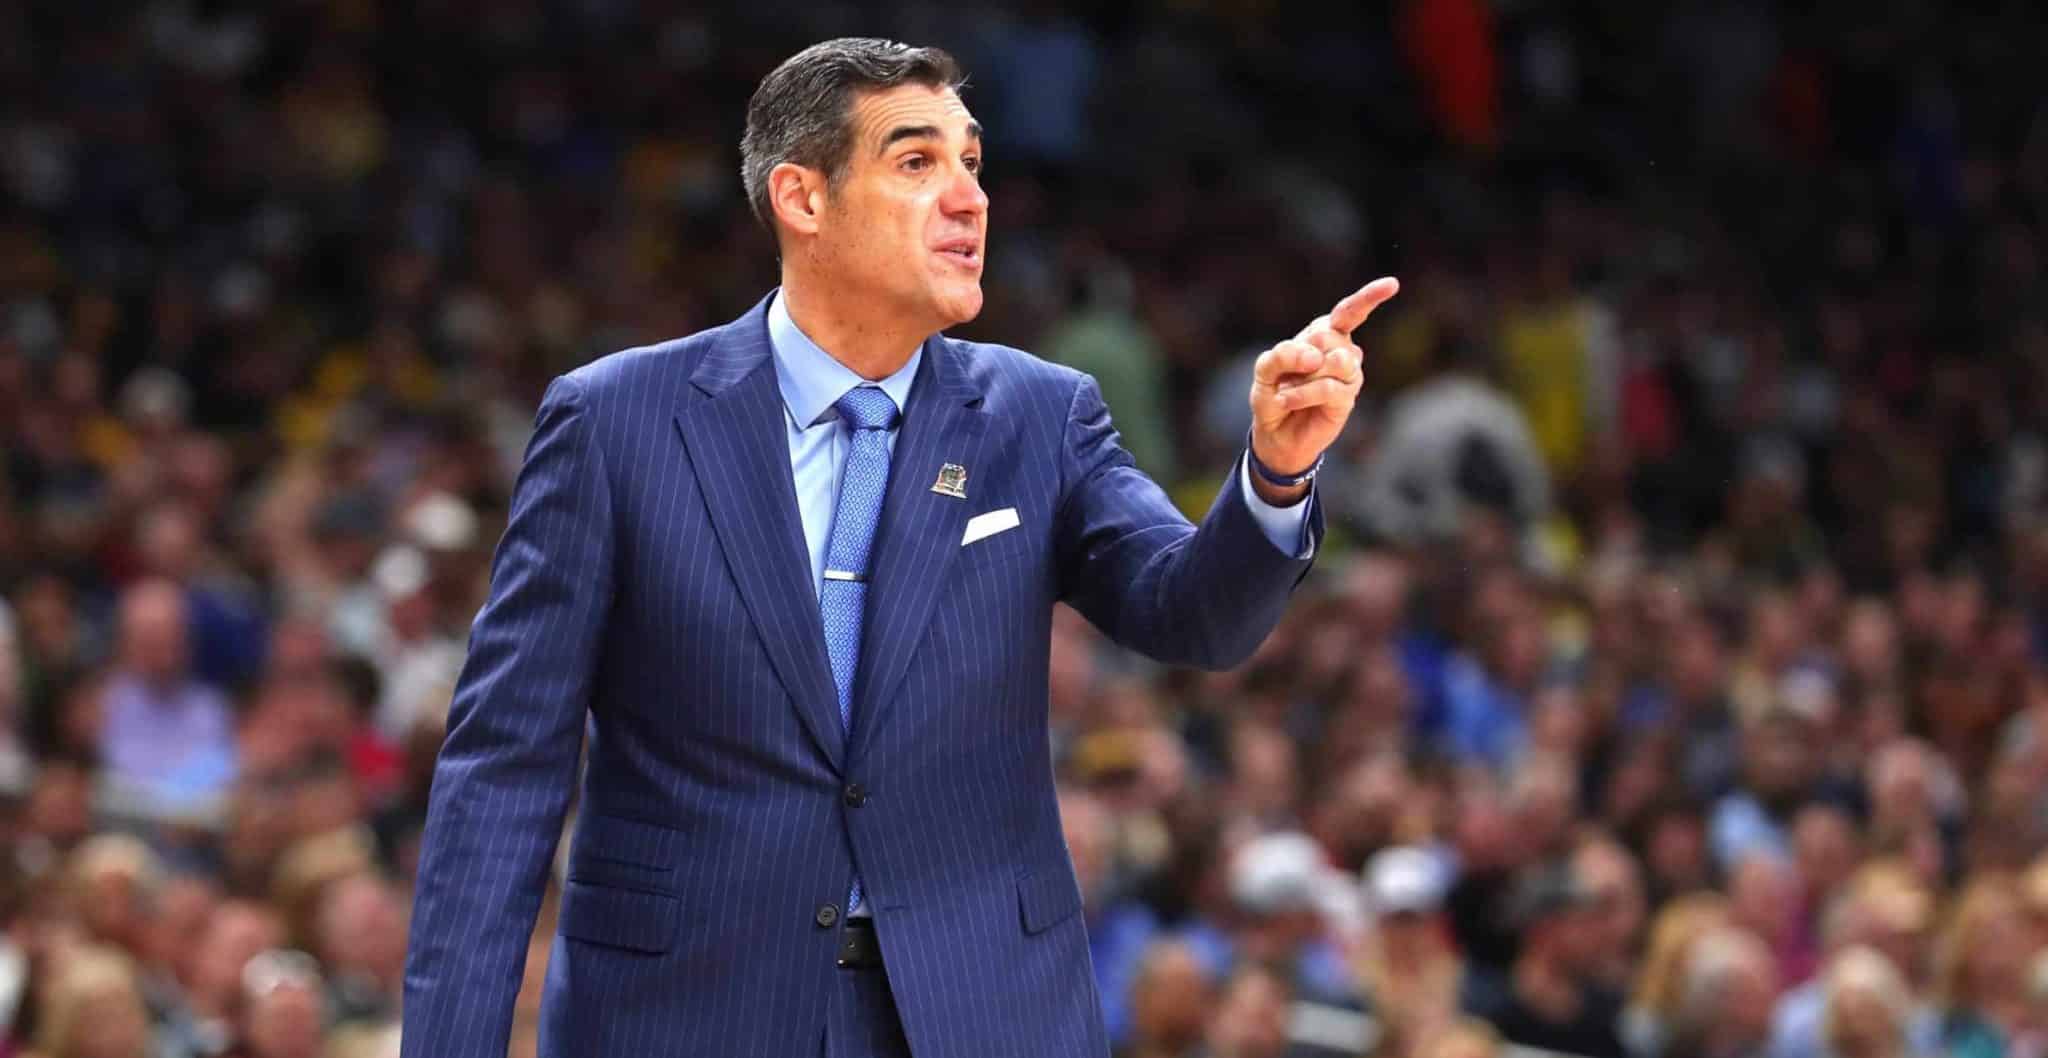 SAN ANTONIO, TX - APRIL 02: Head coach Jay Wright of the Villanova Wildcats reacts against the Michigan Wolverines in the second half during the 2018 NCAA Men's Final Four National Championship game at the Alamodome on April 2, 2018 in San Antonio, Texas. The Villanova Wildcats defeated the Michigan Wolverines 79-62.